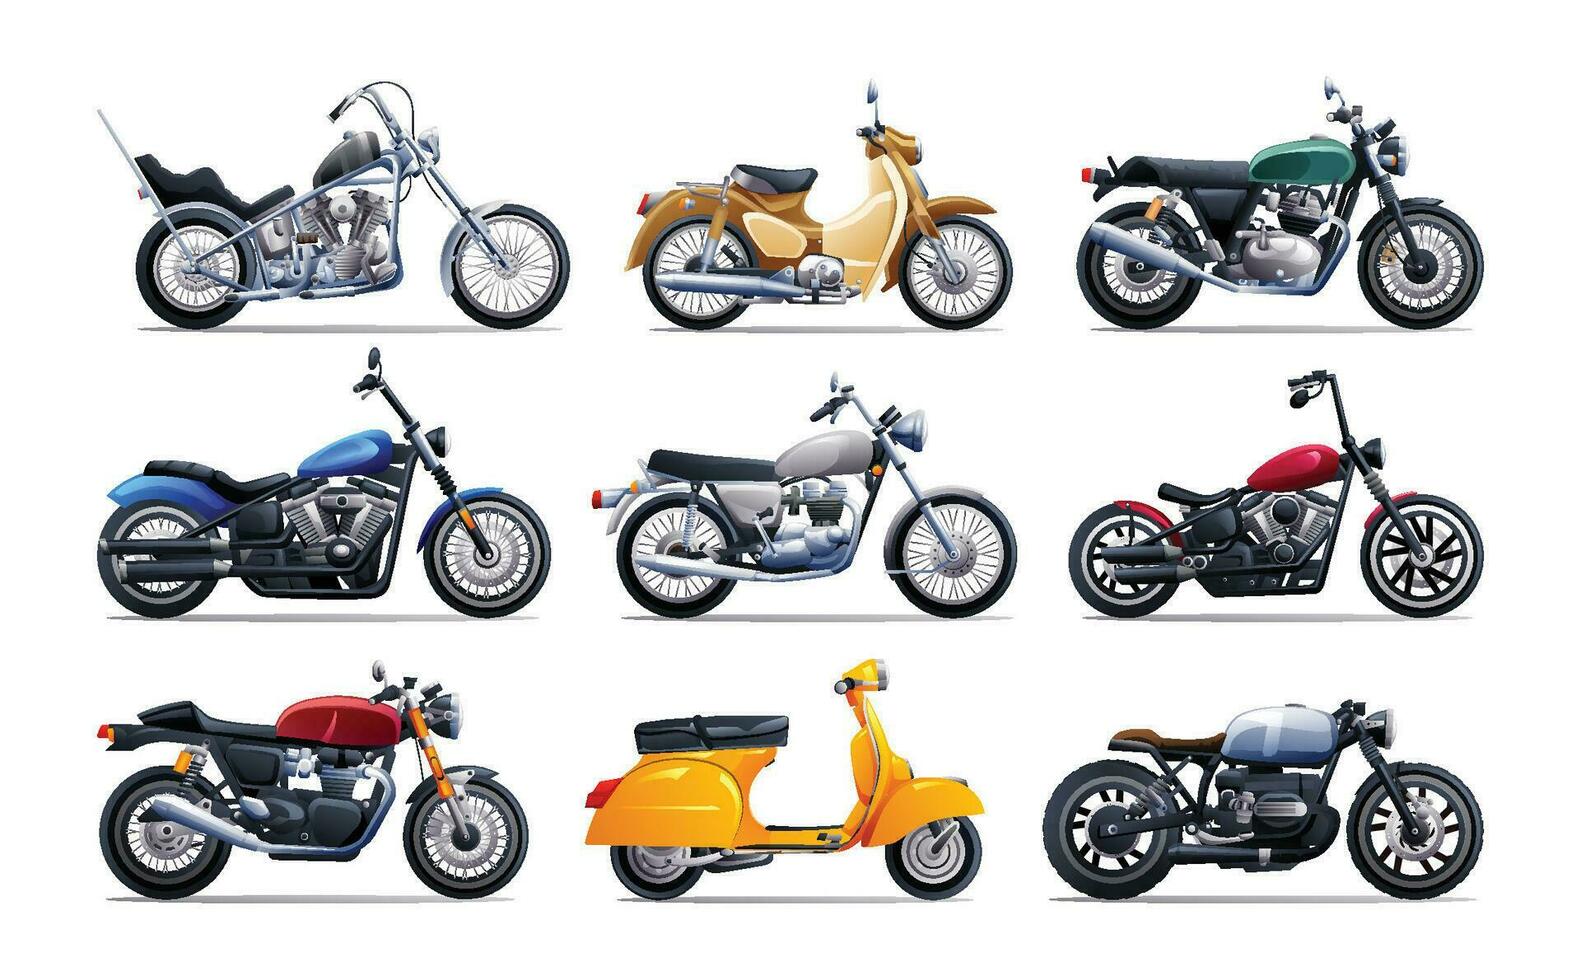 Set of classic motorcycles in various types. Vector cartoon illustration